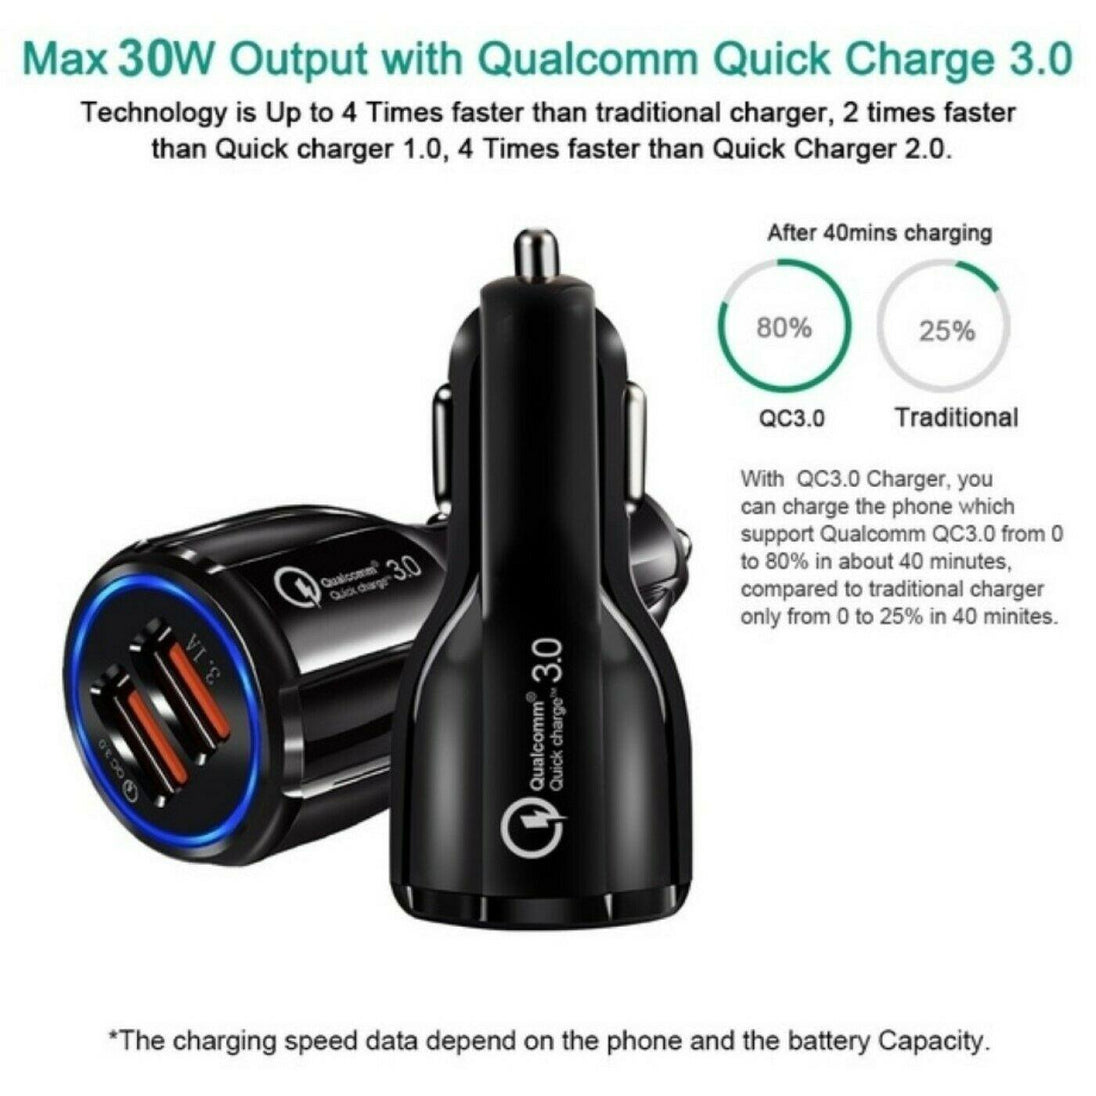 2 Pack PBG 2 Port USB Fast Car Charger Adapter For Devices - PremiumBrandGoods